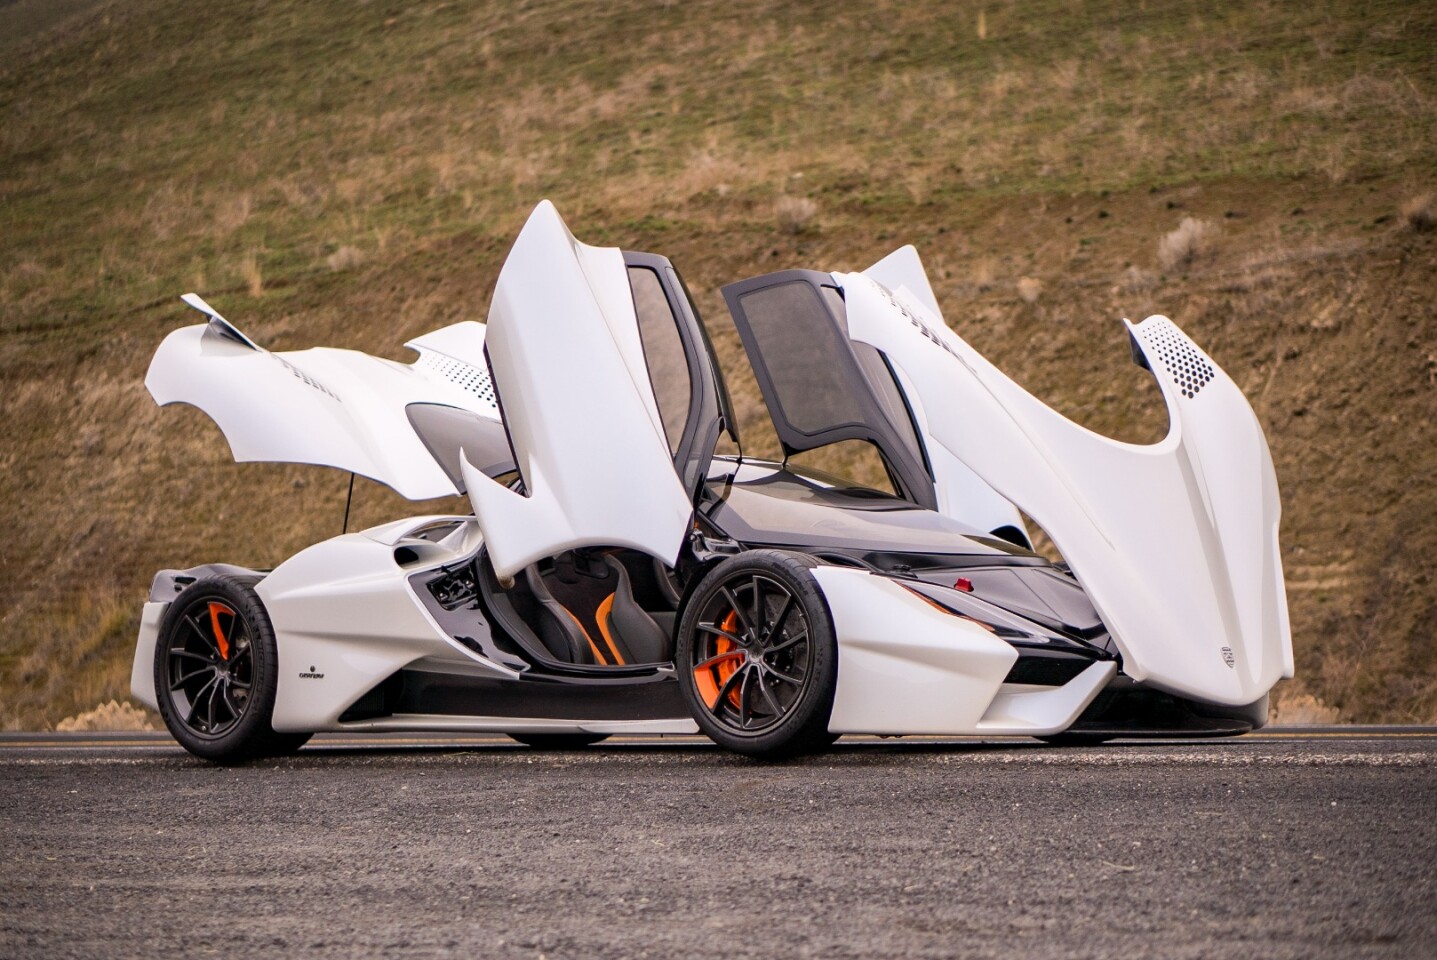 THE SSC Tuatara in party mode, with all the doors and covers opened